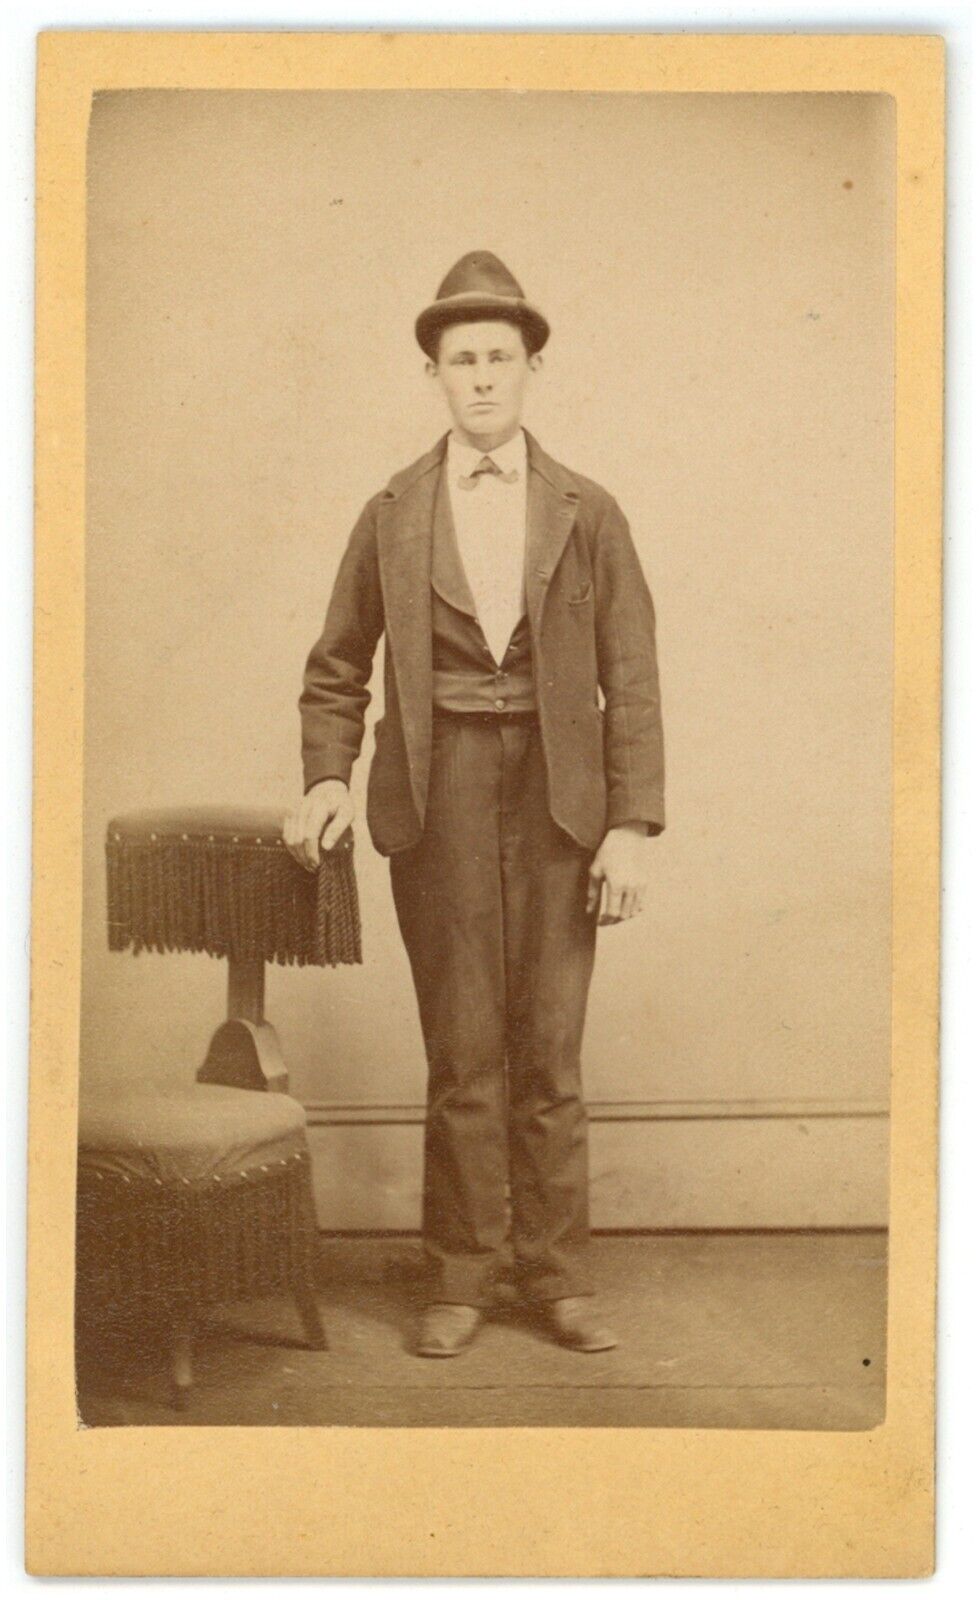 CIRCA 1880'S CDV Featuring Man Wearing Suit and Funny Looking Hat In Studio